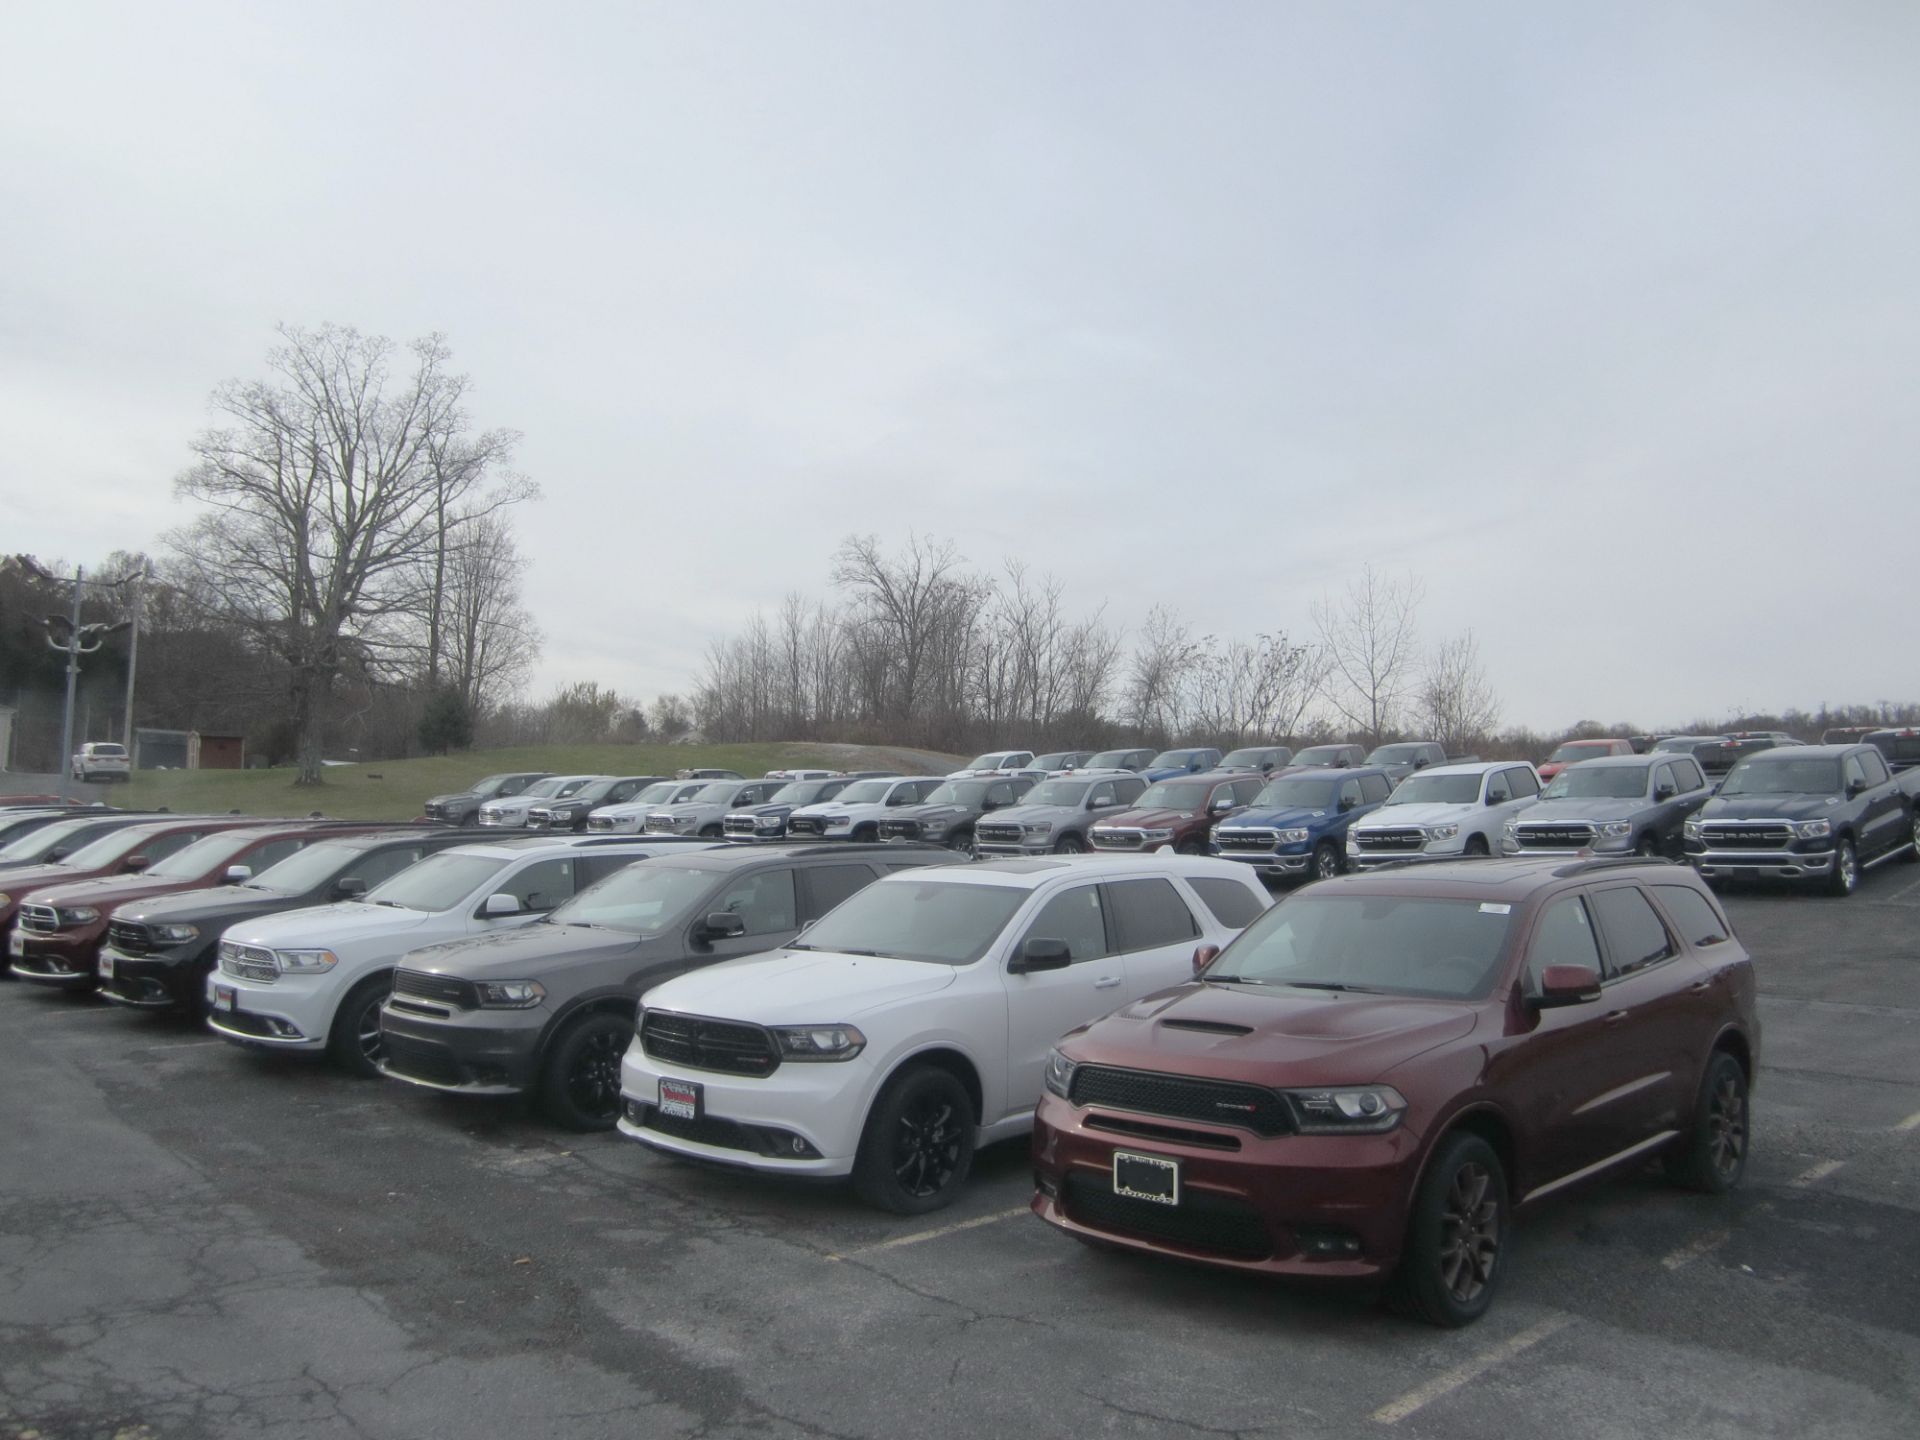 Entirety Bid consisting of all 101 vehicles in this auction, from Lots 201 - 312, subject to